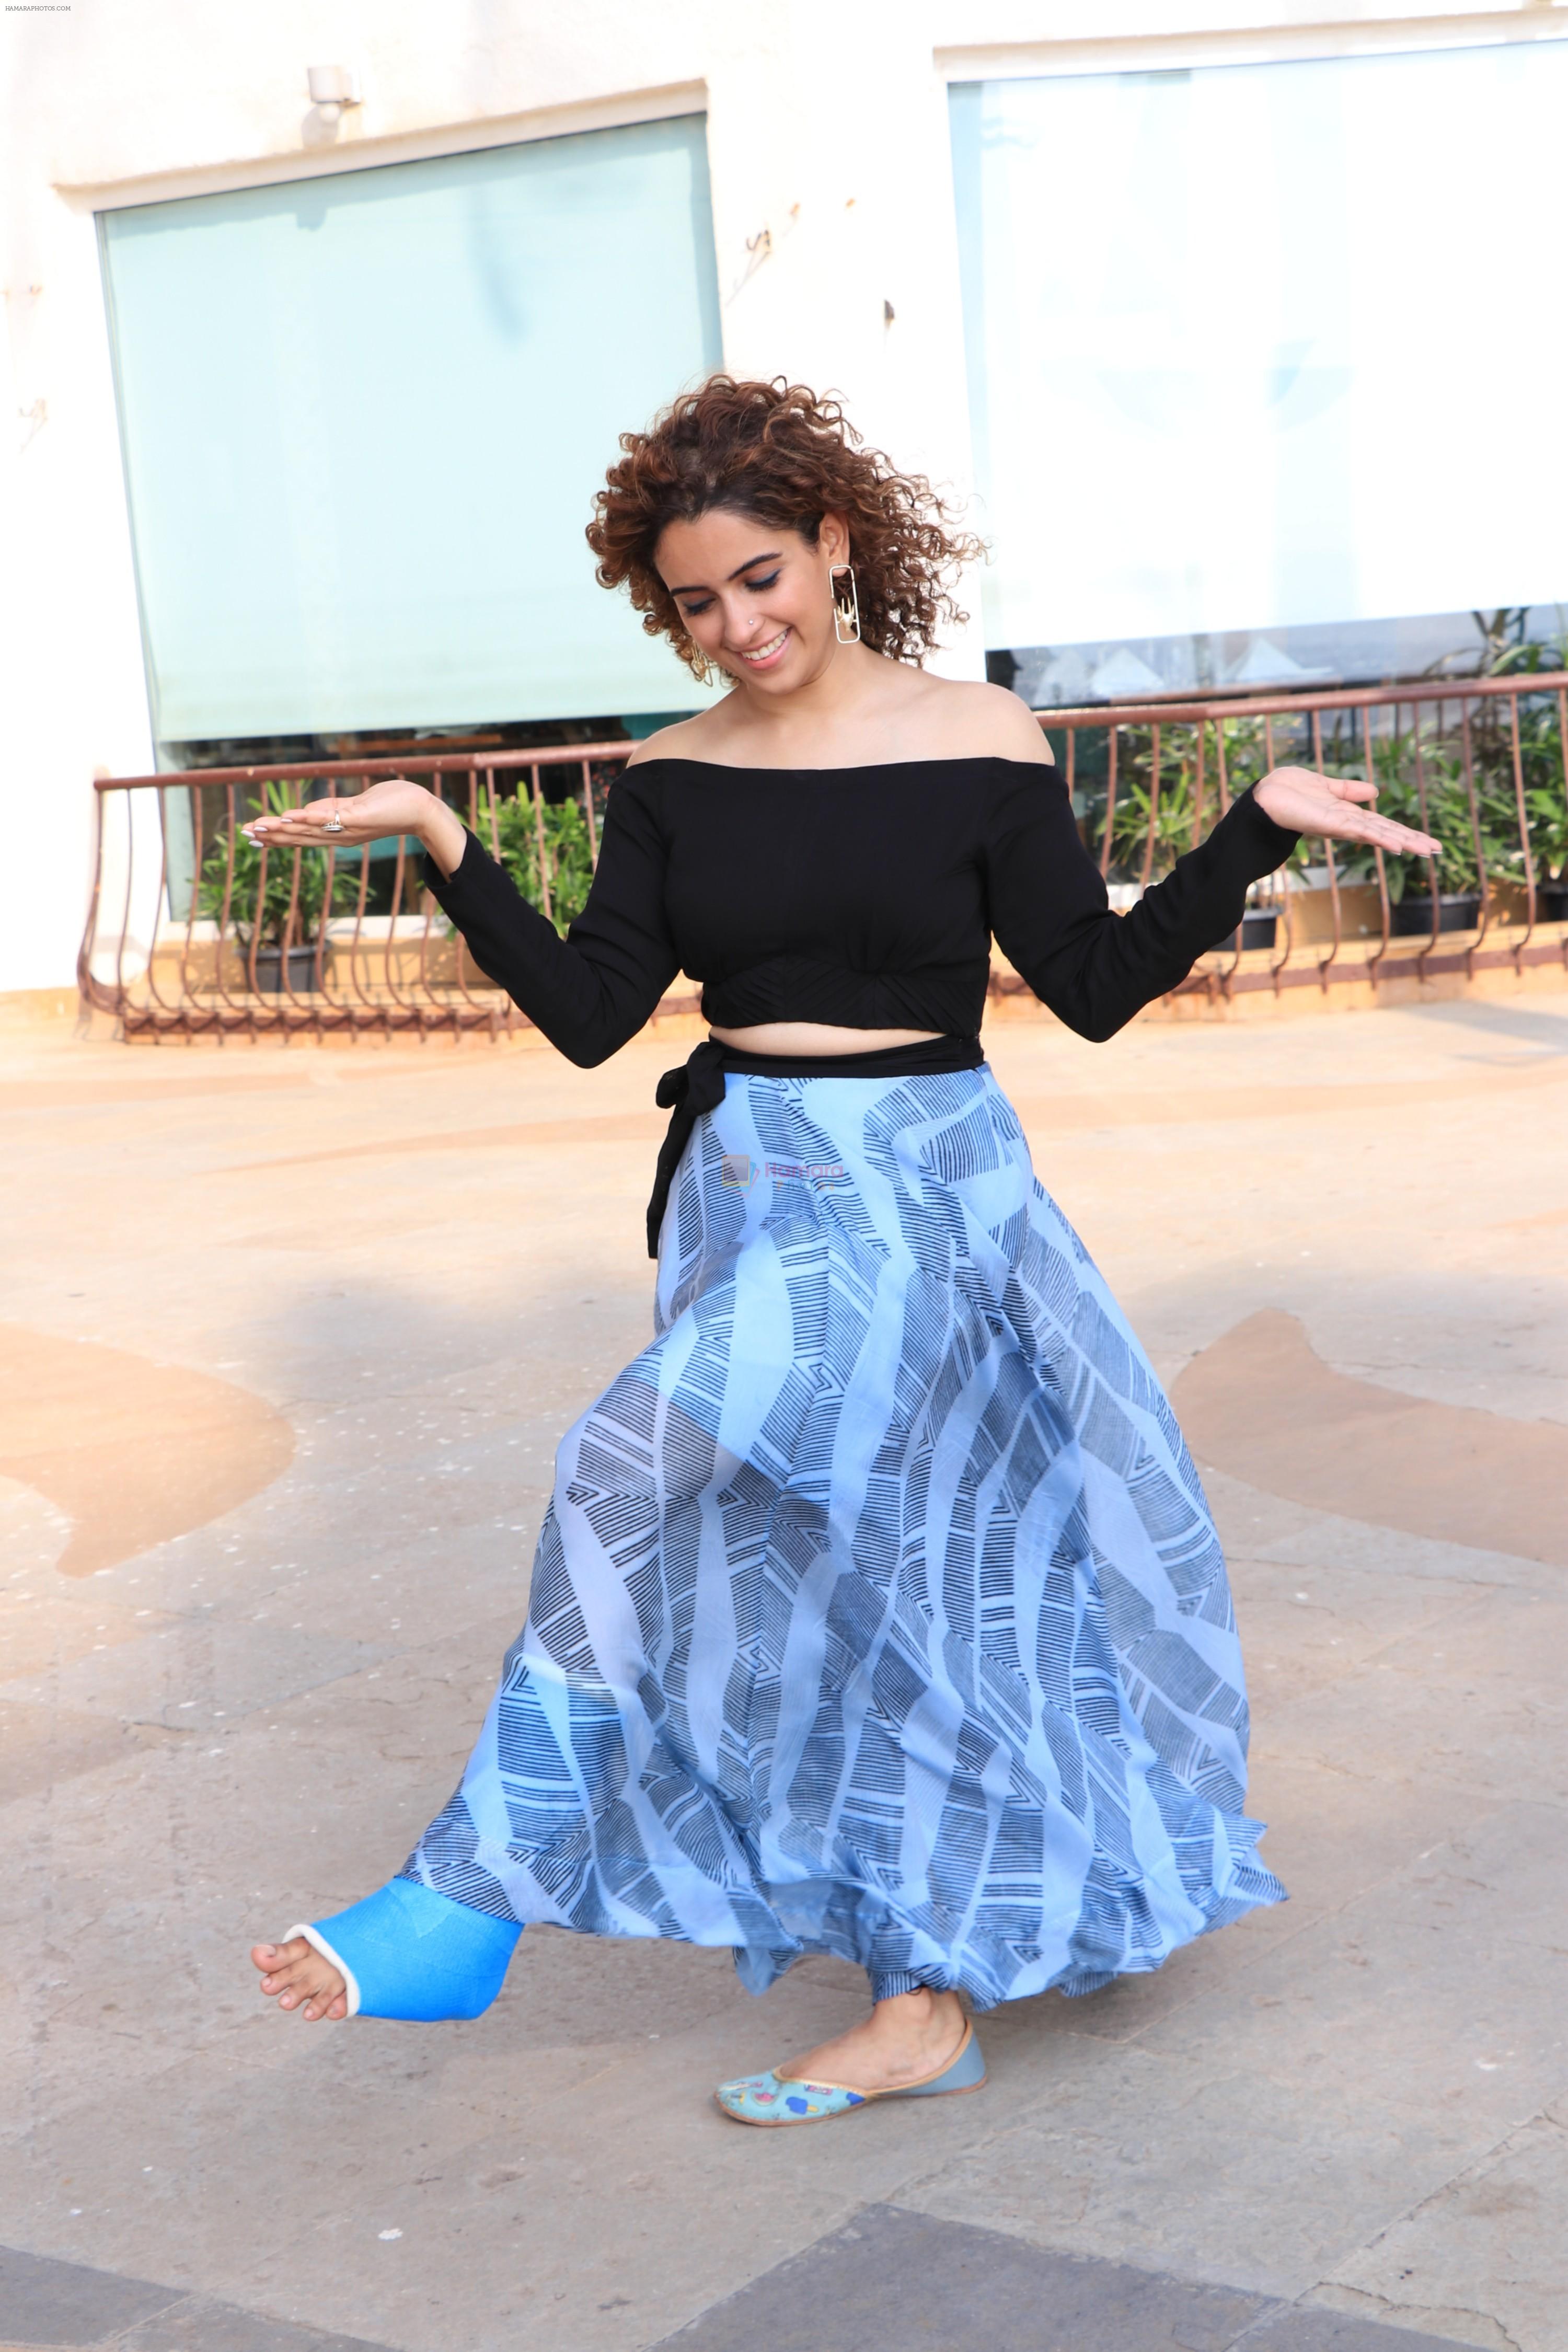 Sanya Malhotra during media interactions for film Pataakha in Sun n Sand, juhu on 23rd Sept 2018